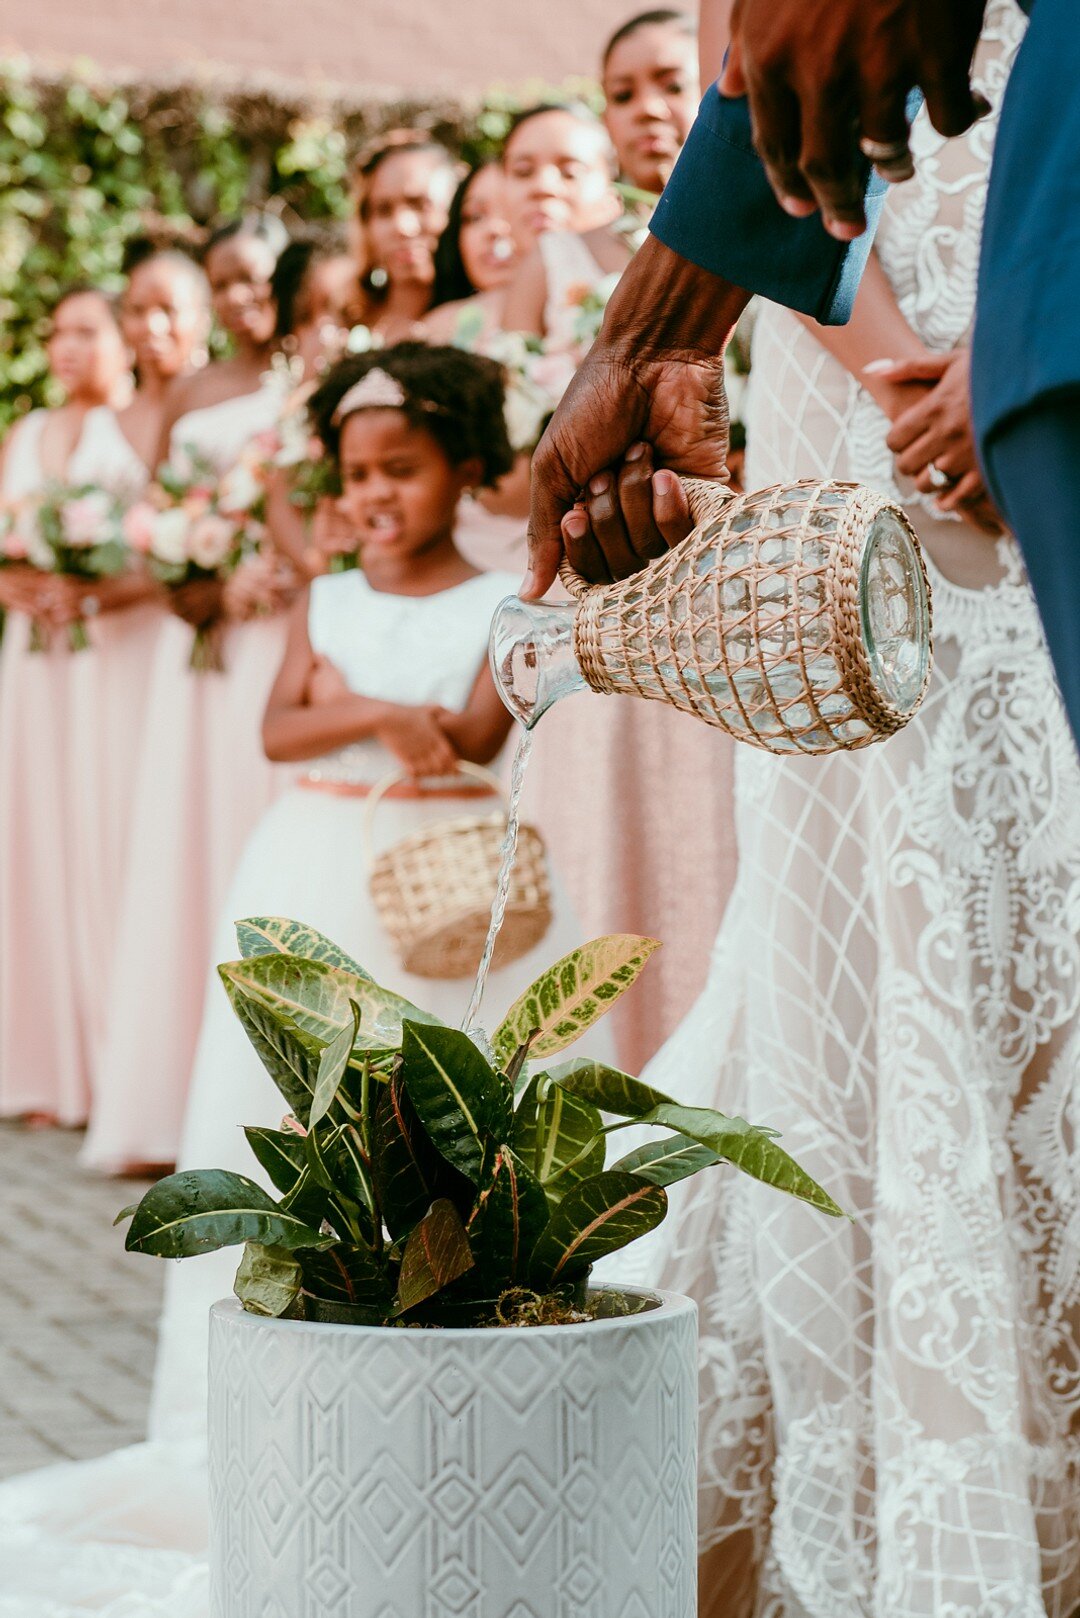 Wedding ceremony inspiration: Sophisticated Southside Chicago wedding captured by Emily-Melissa Photography LLC featured on CHI thee WED. Find more Chicago wedding ideas on CHItheeWED.com!